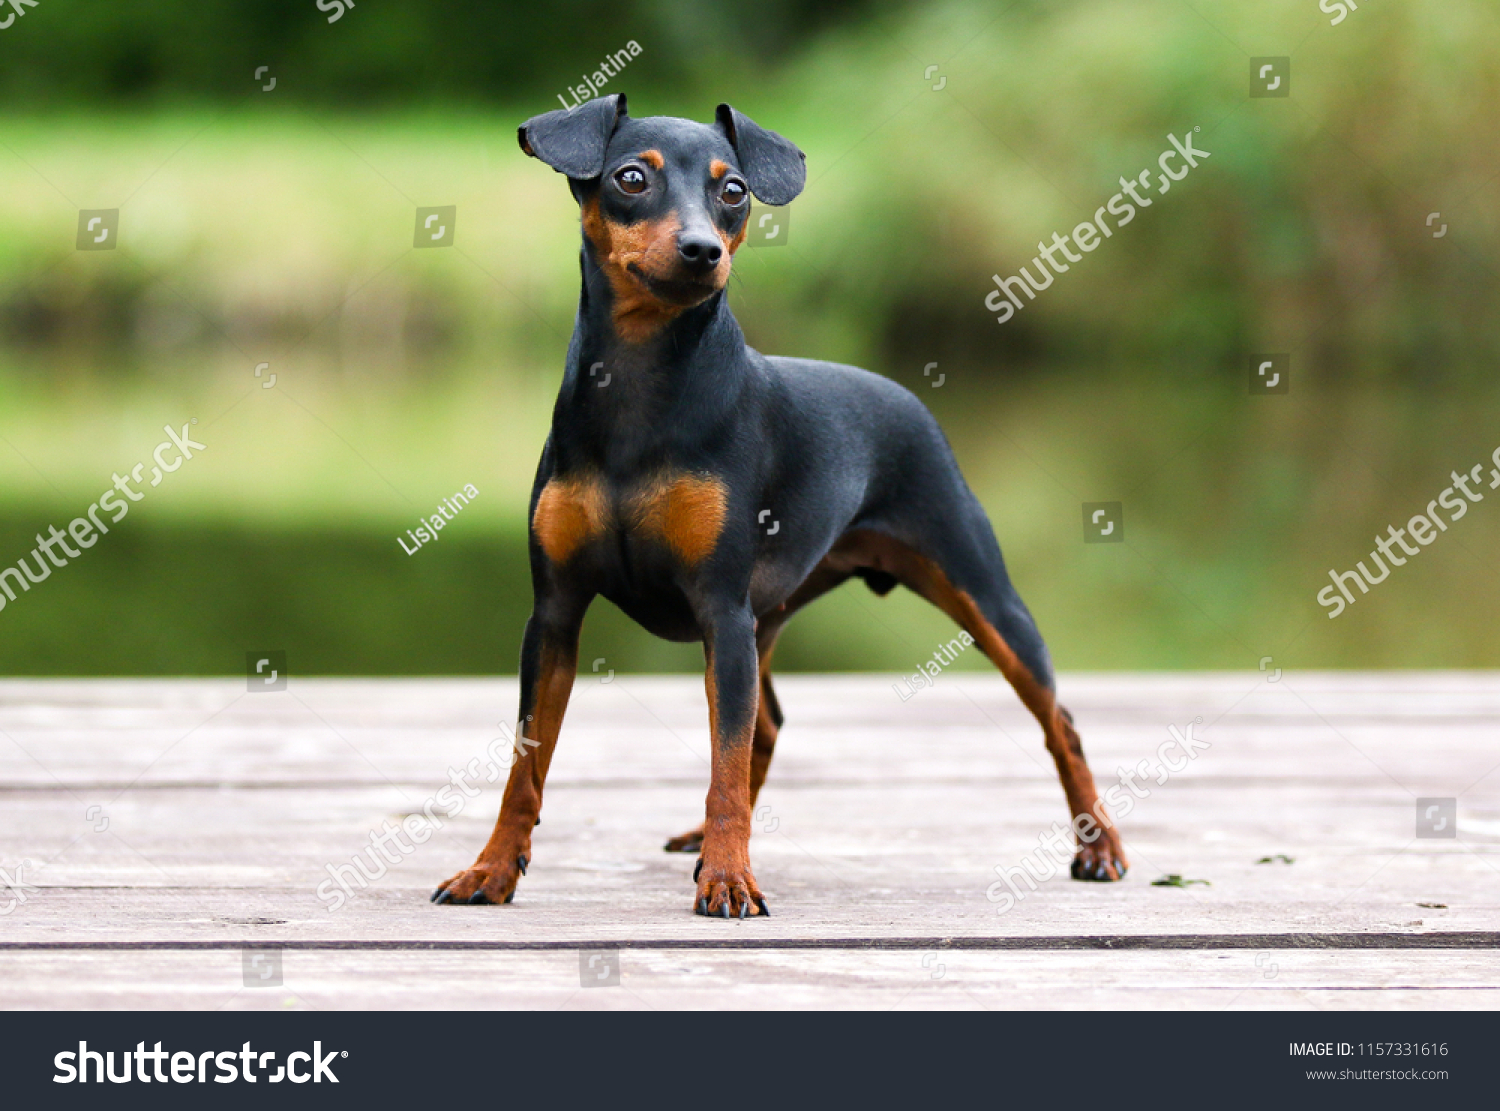 Black and tan miniature pinscher portrait on summer time.  German miniature pinscher standing outdoors on a wooden pier with green background. Smart and cute pincher with funny ears and round eyes #1157331616